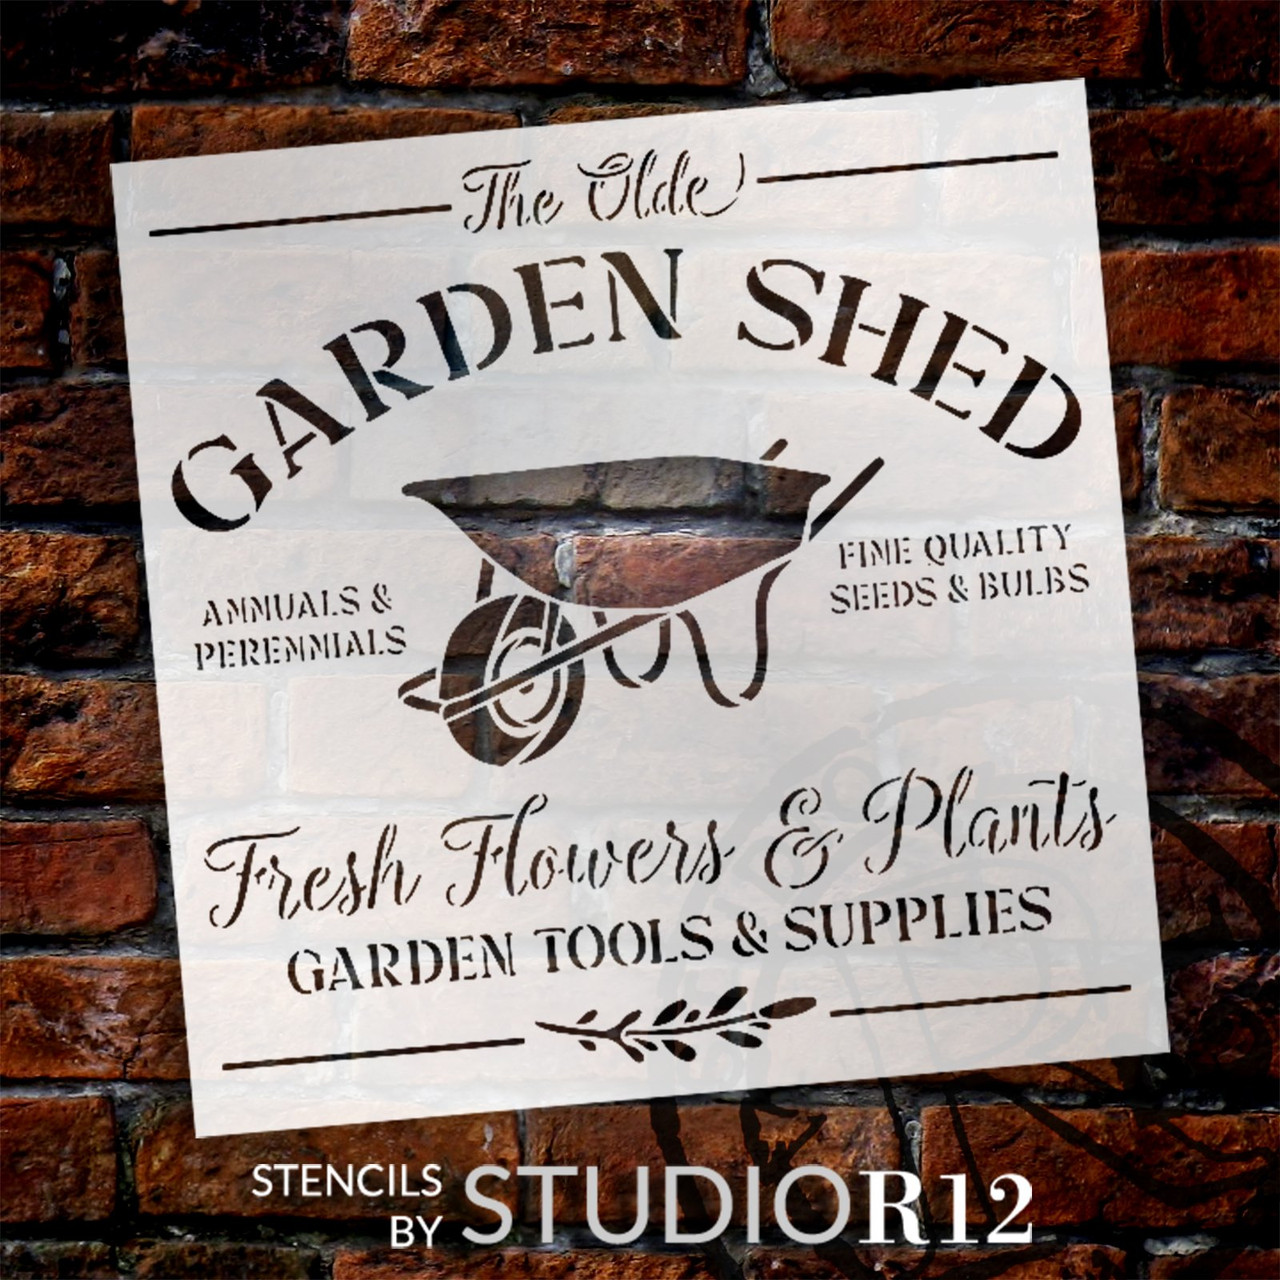 The Olde Garden Shed Stencil by StudioR12 | Fresh Flowers & Plants | Craft DIY Greenhouse Theme Decor | Easy Painting Idea | Select Size